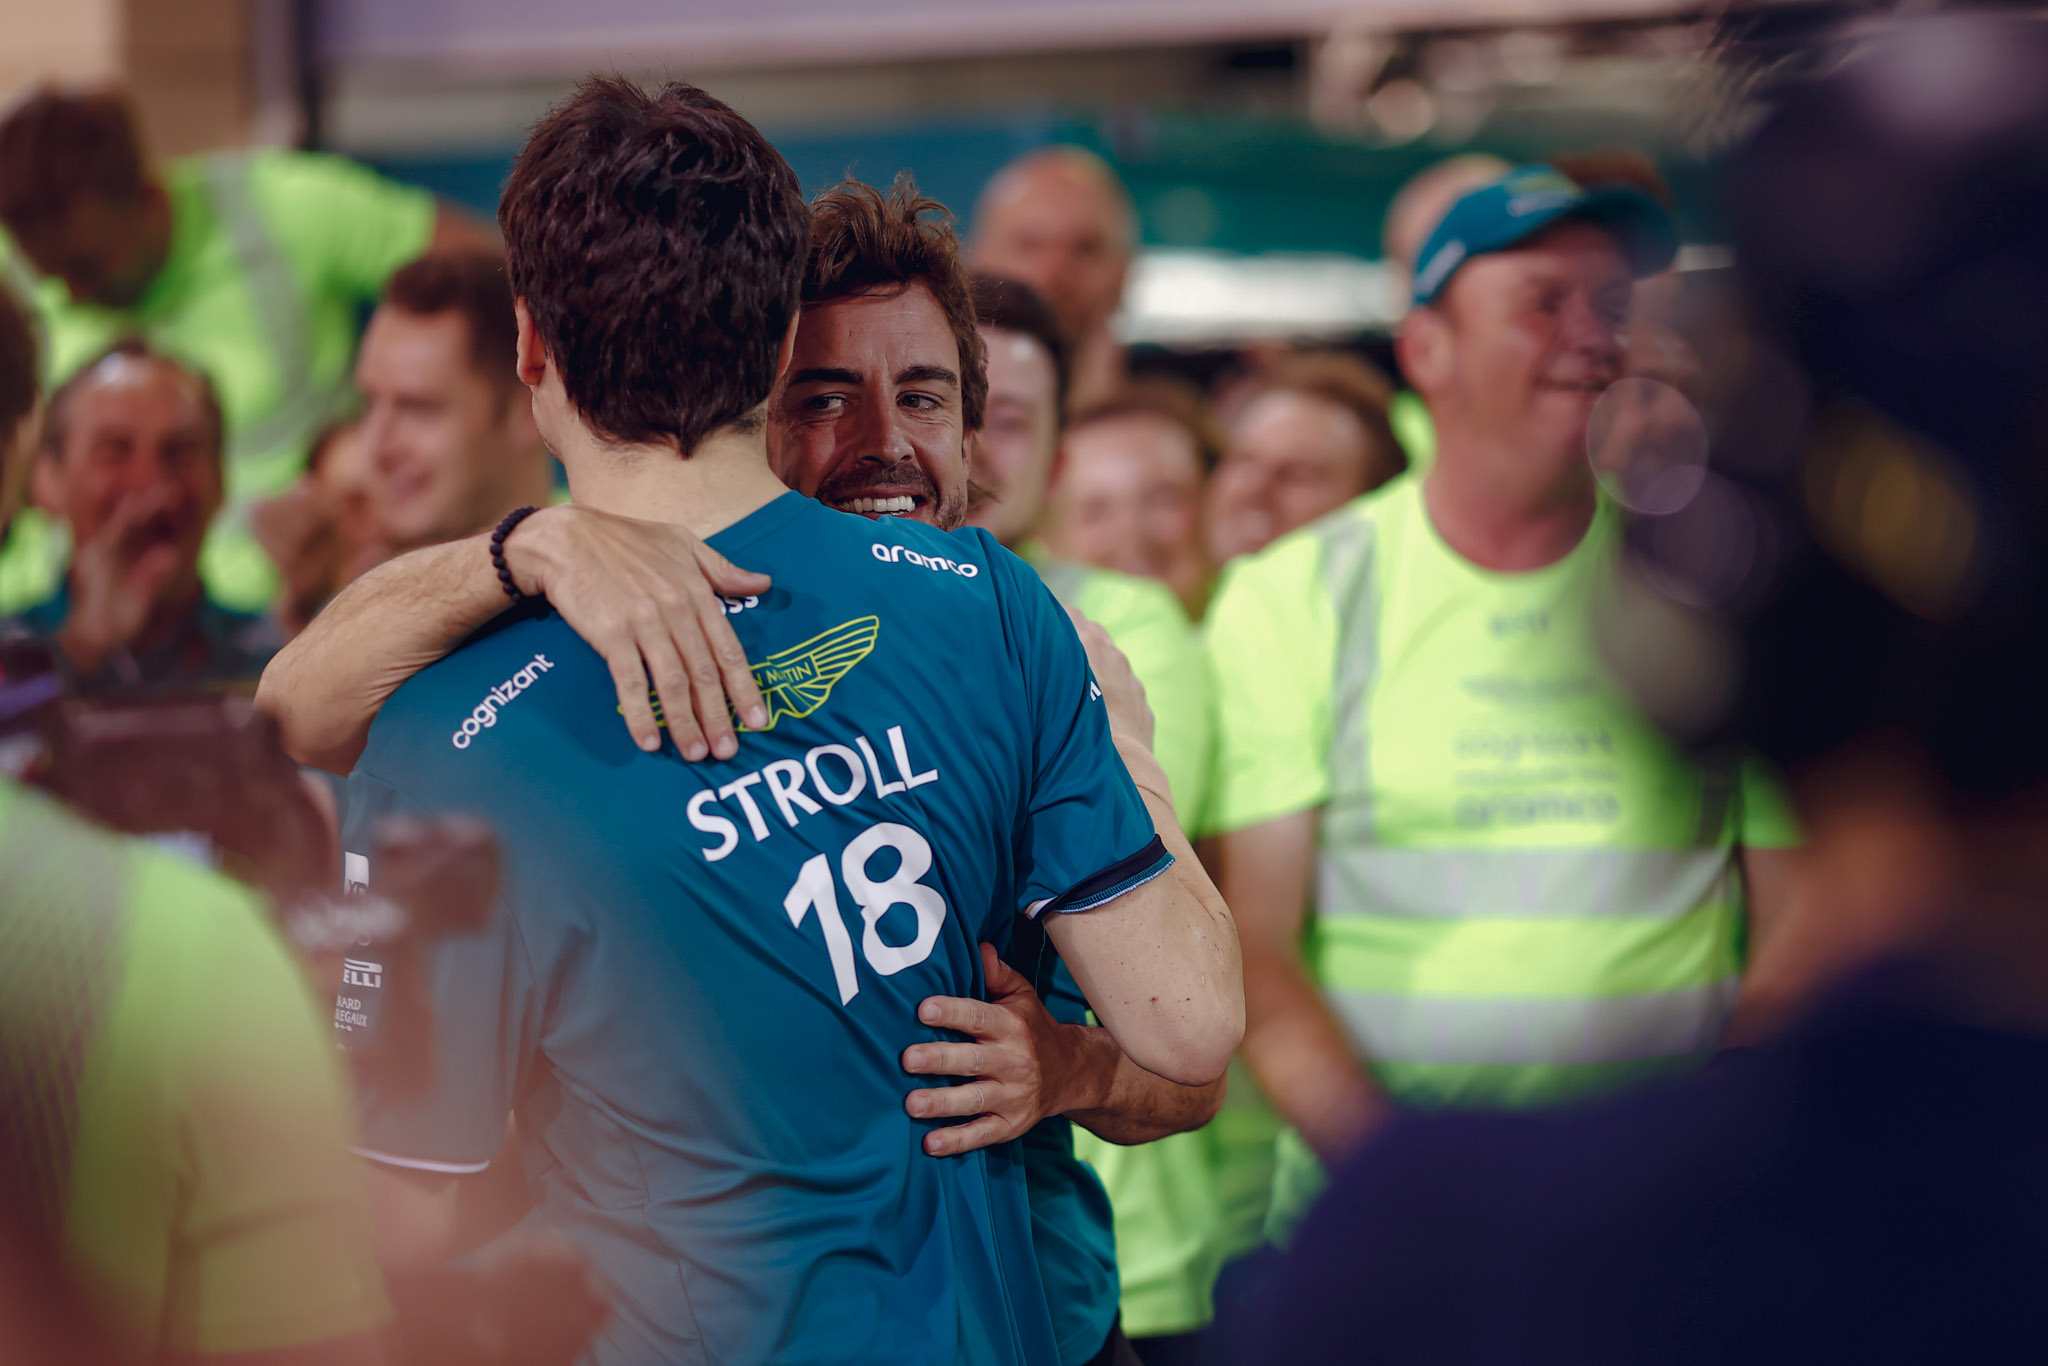 Lance Stroll and Fernando Alonso embrace after the Spaniard's podium in Bahrain.